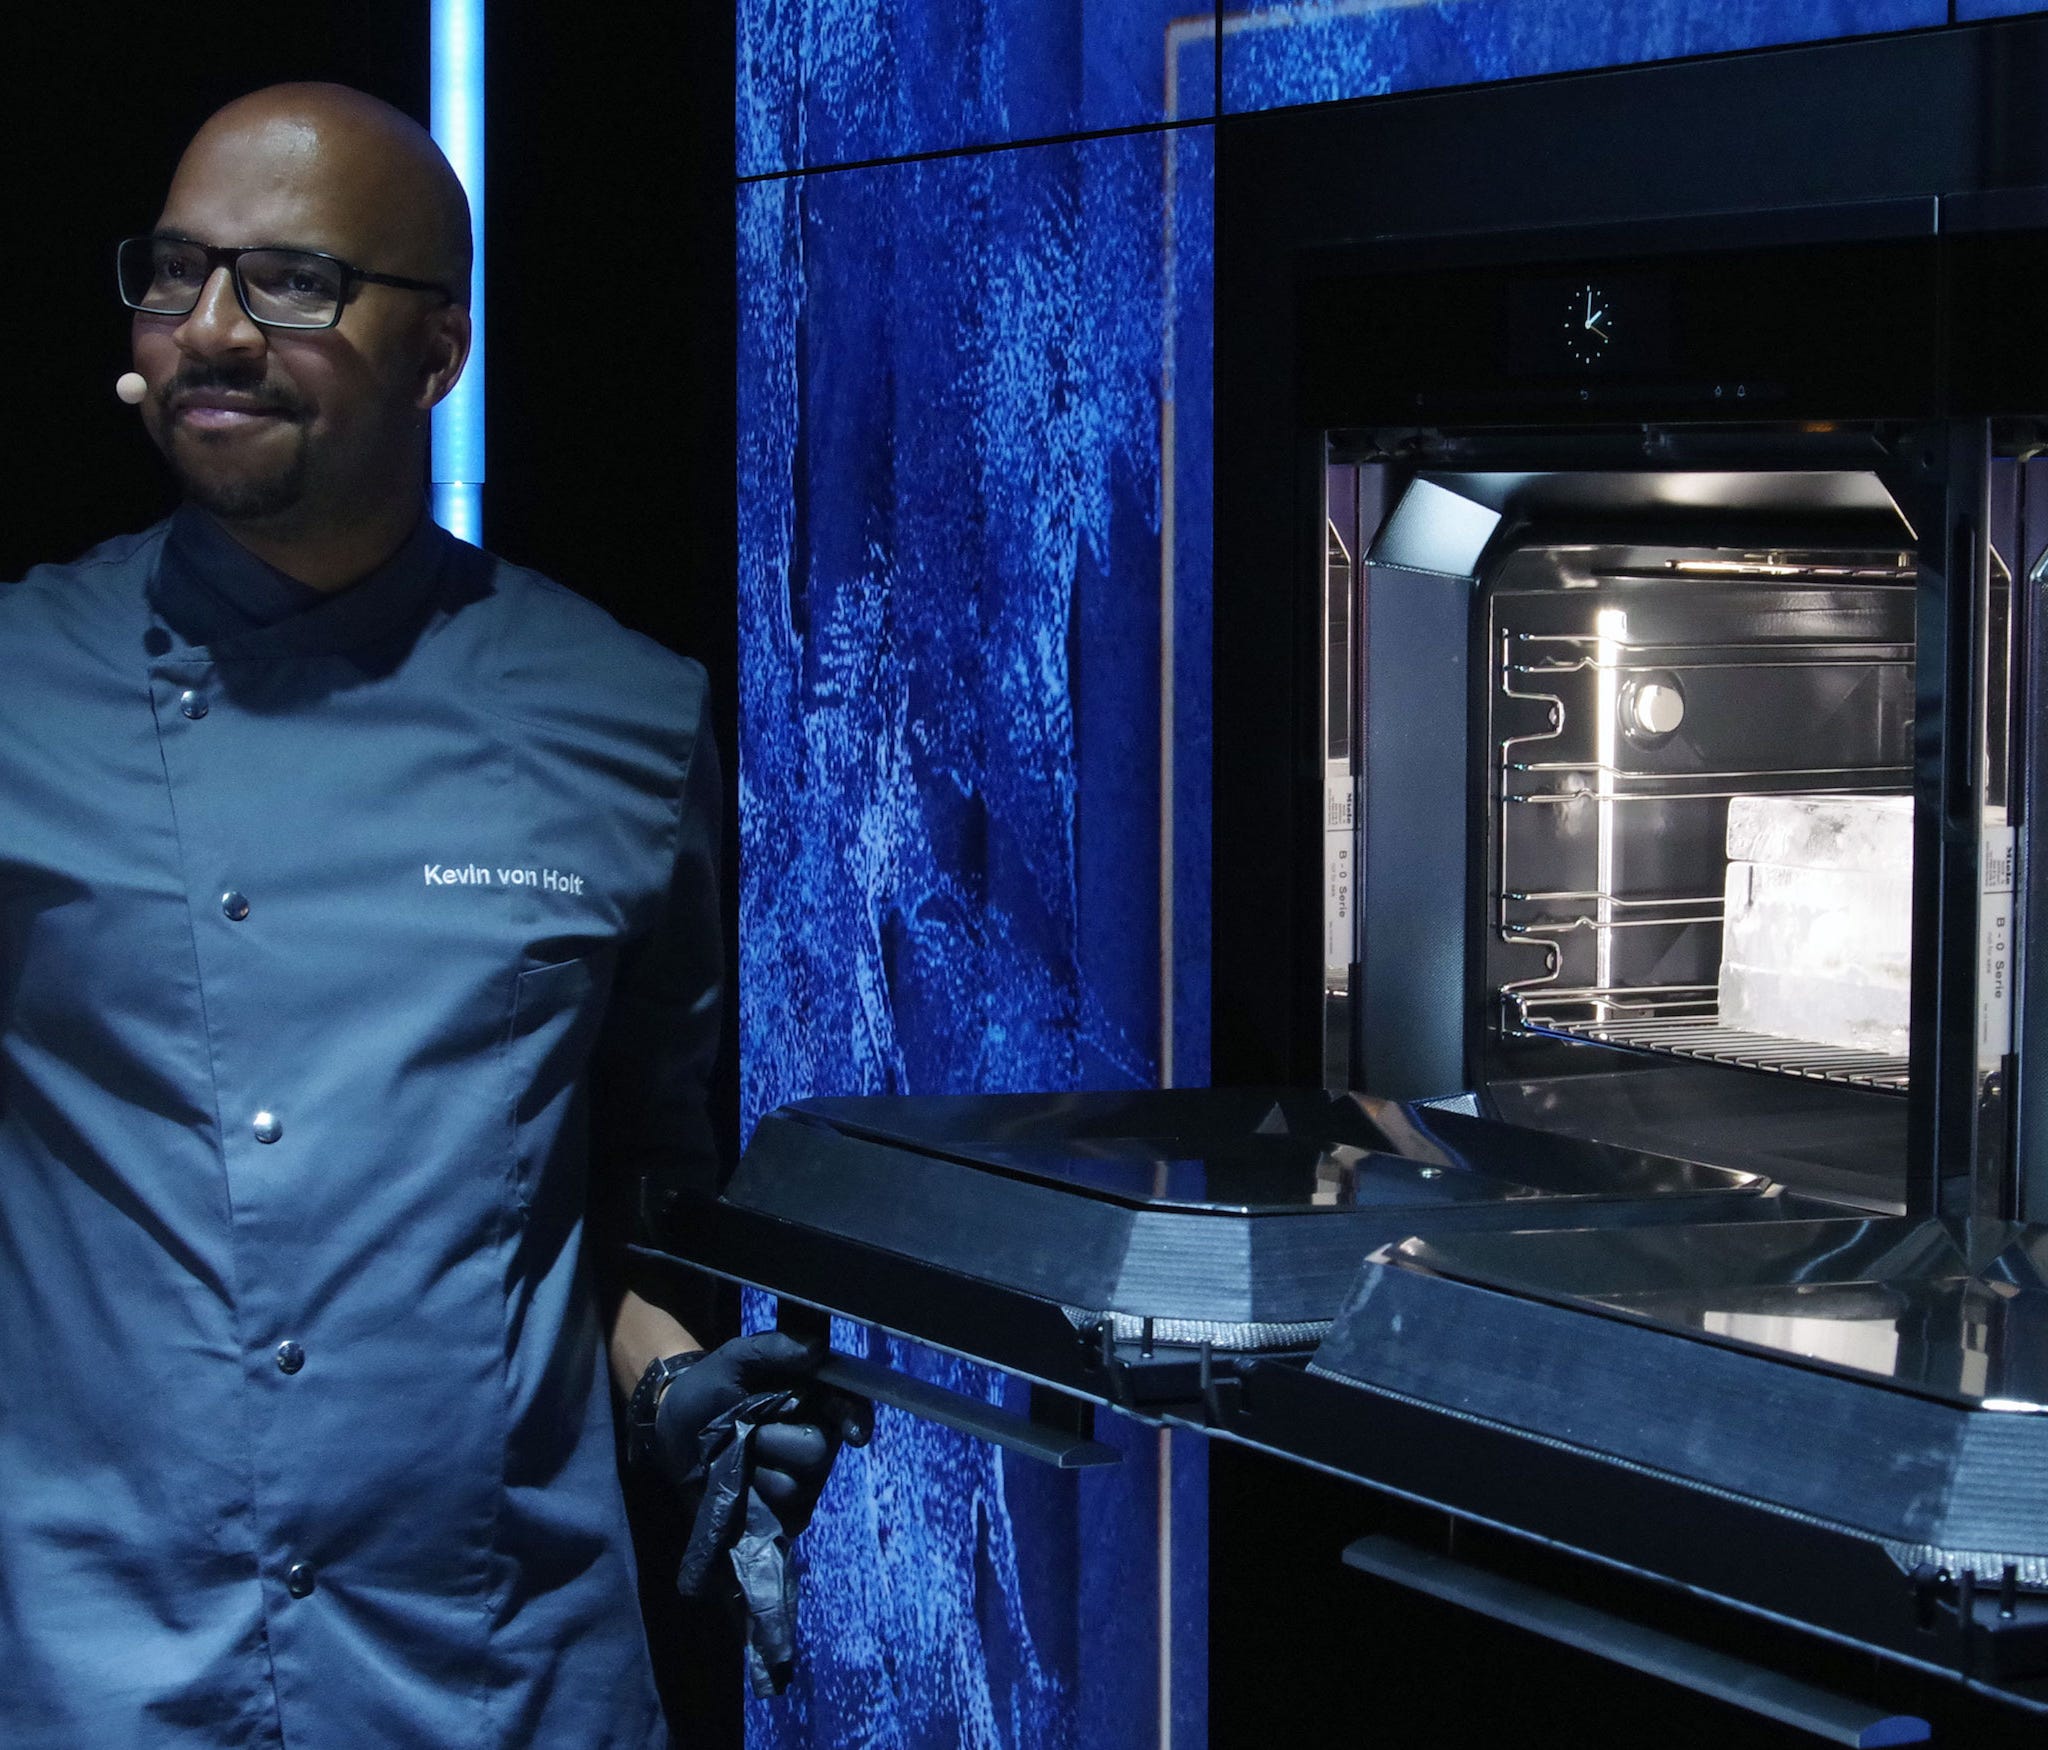 Miele's new Dialog Oven can cook a fish through ice without melting the ice